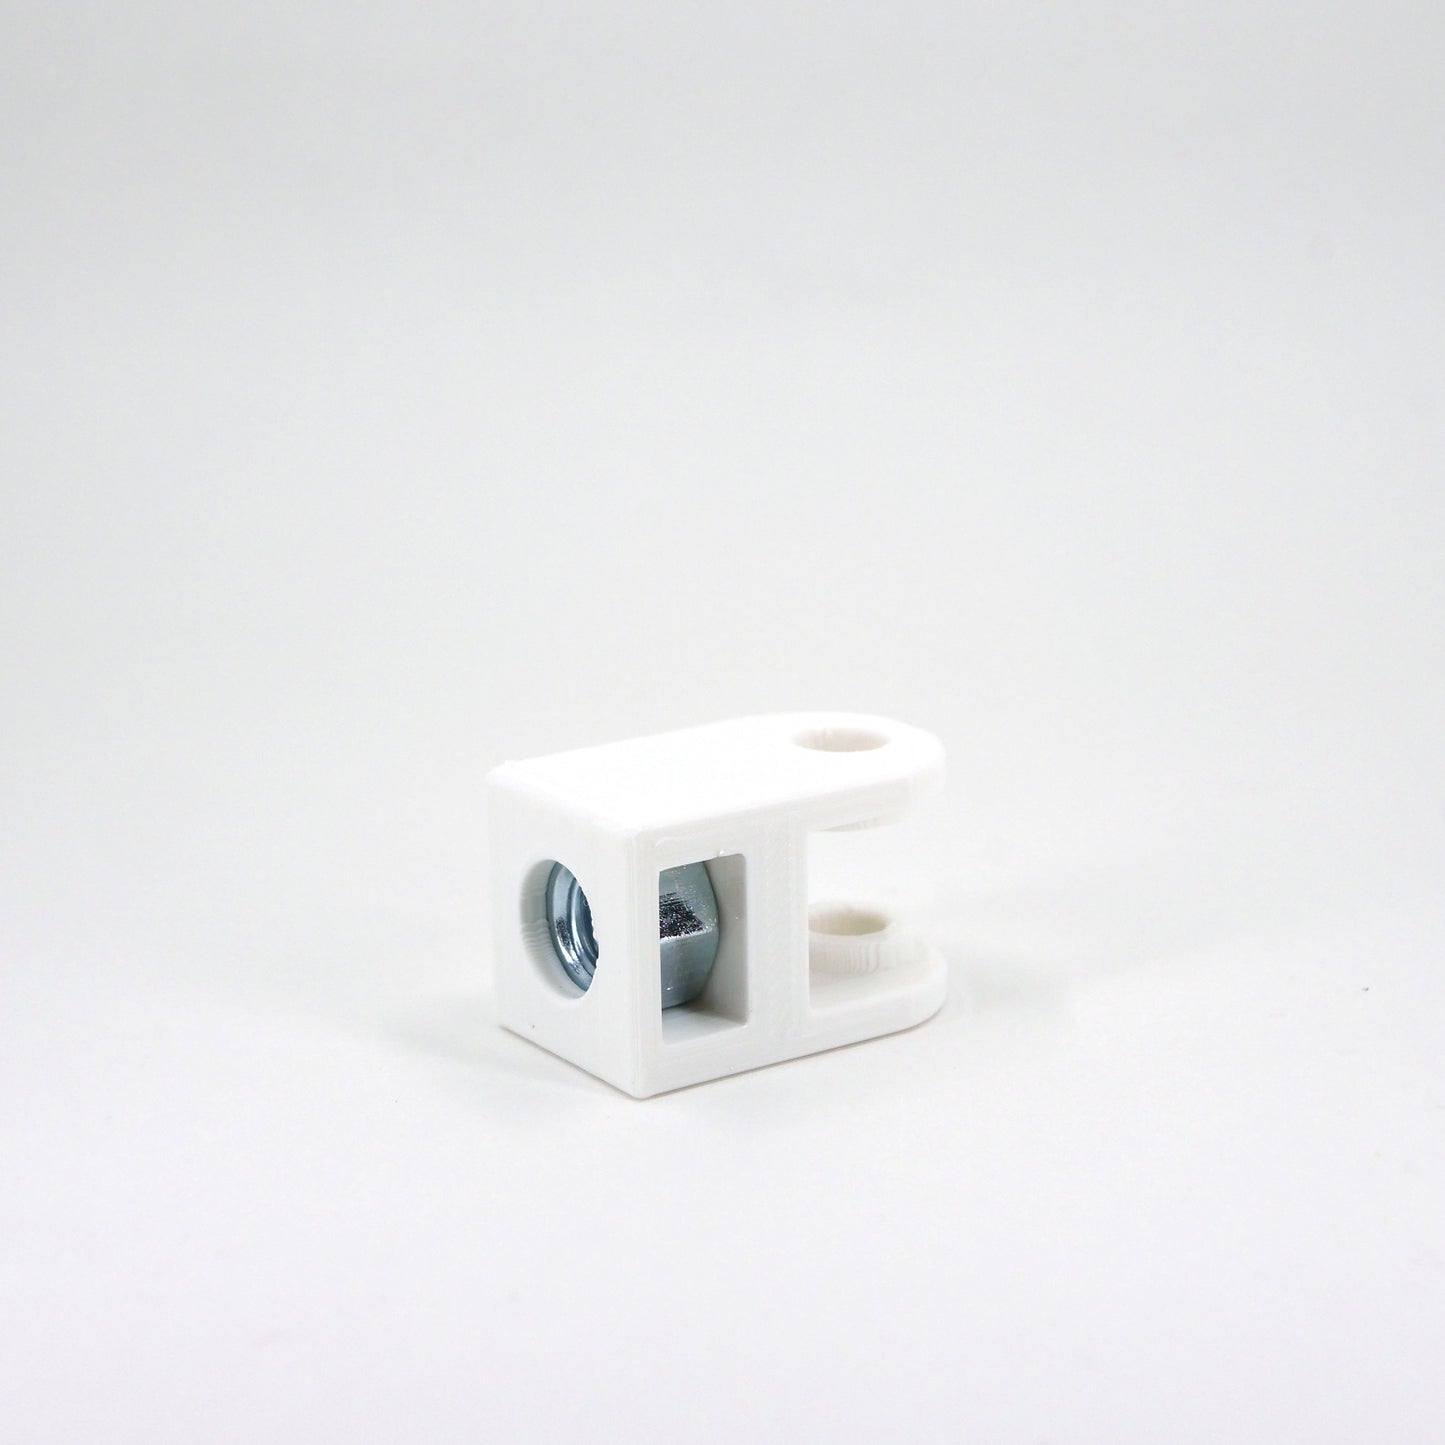 The front of a white HyperX DuoCast microphone mount adapter.